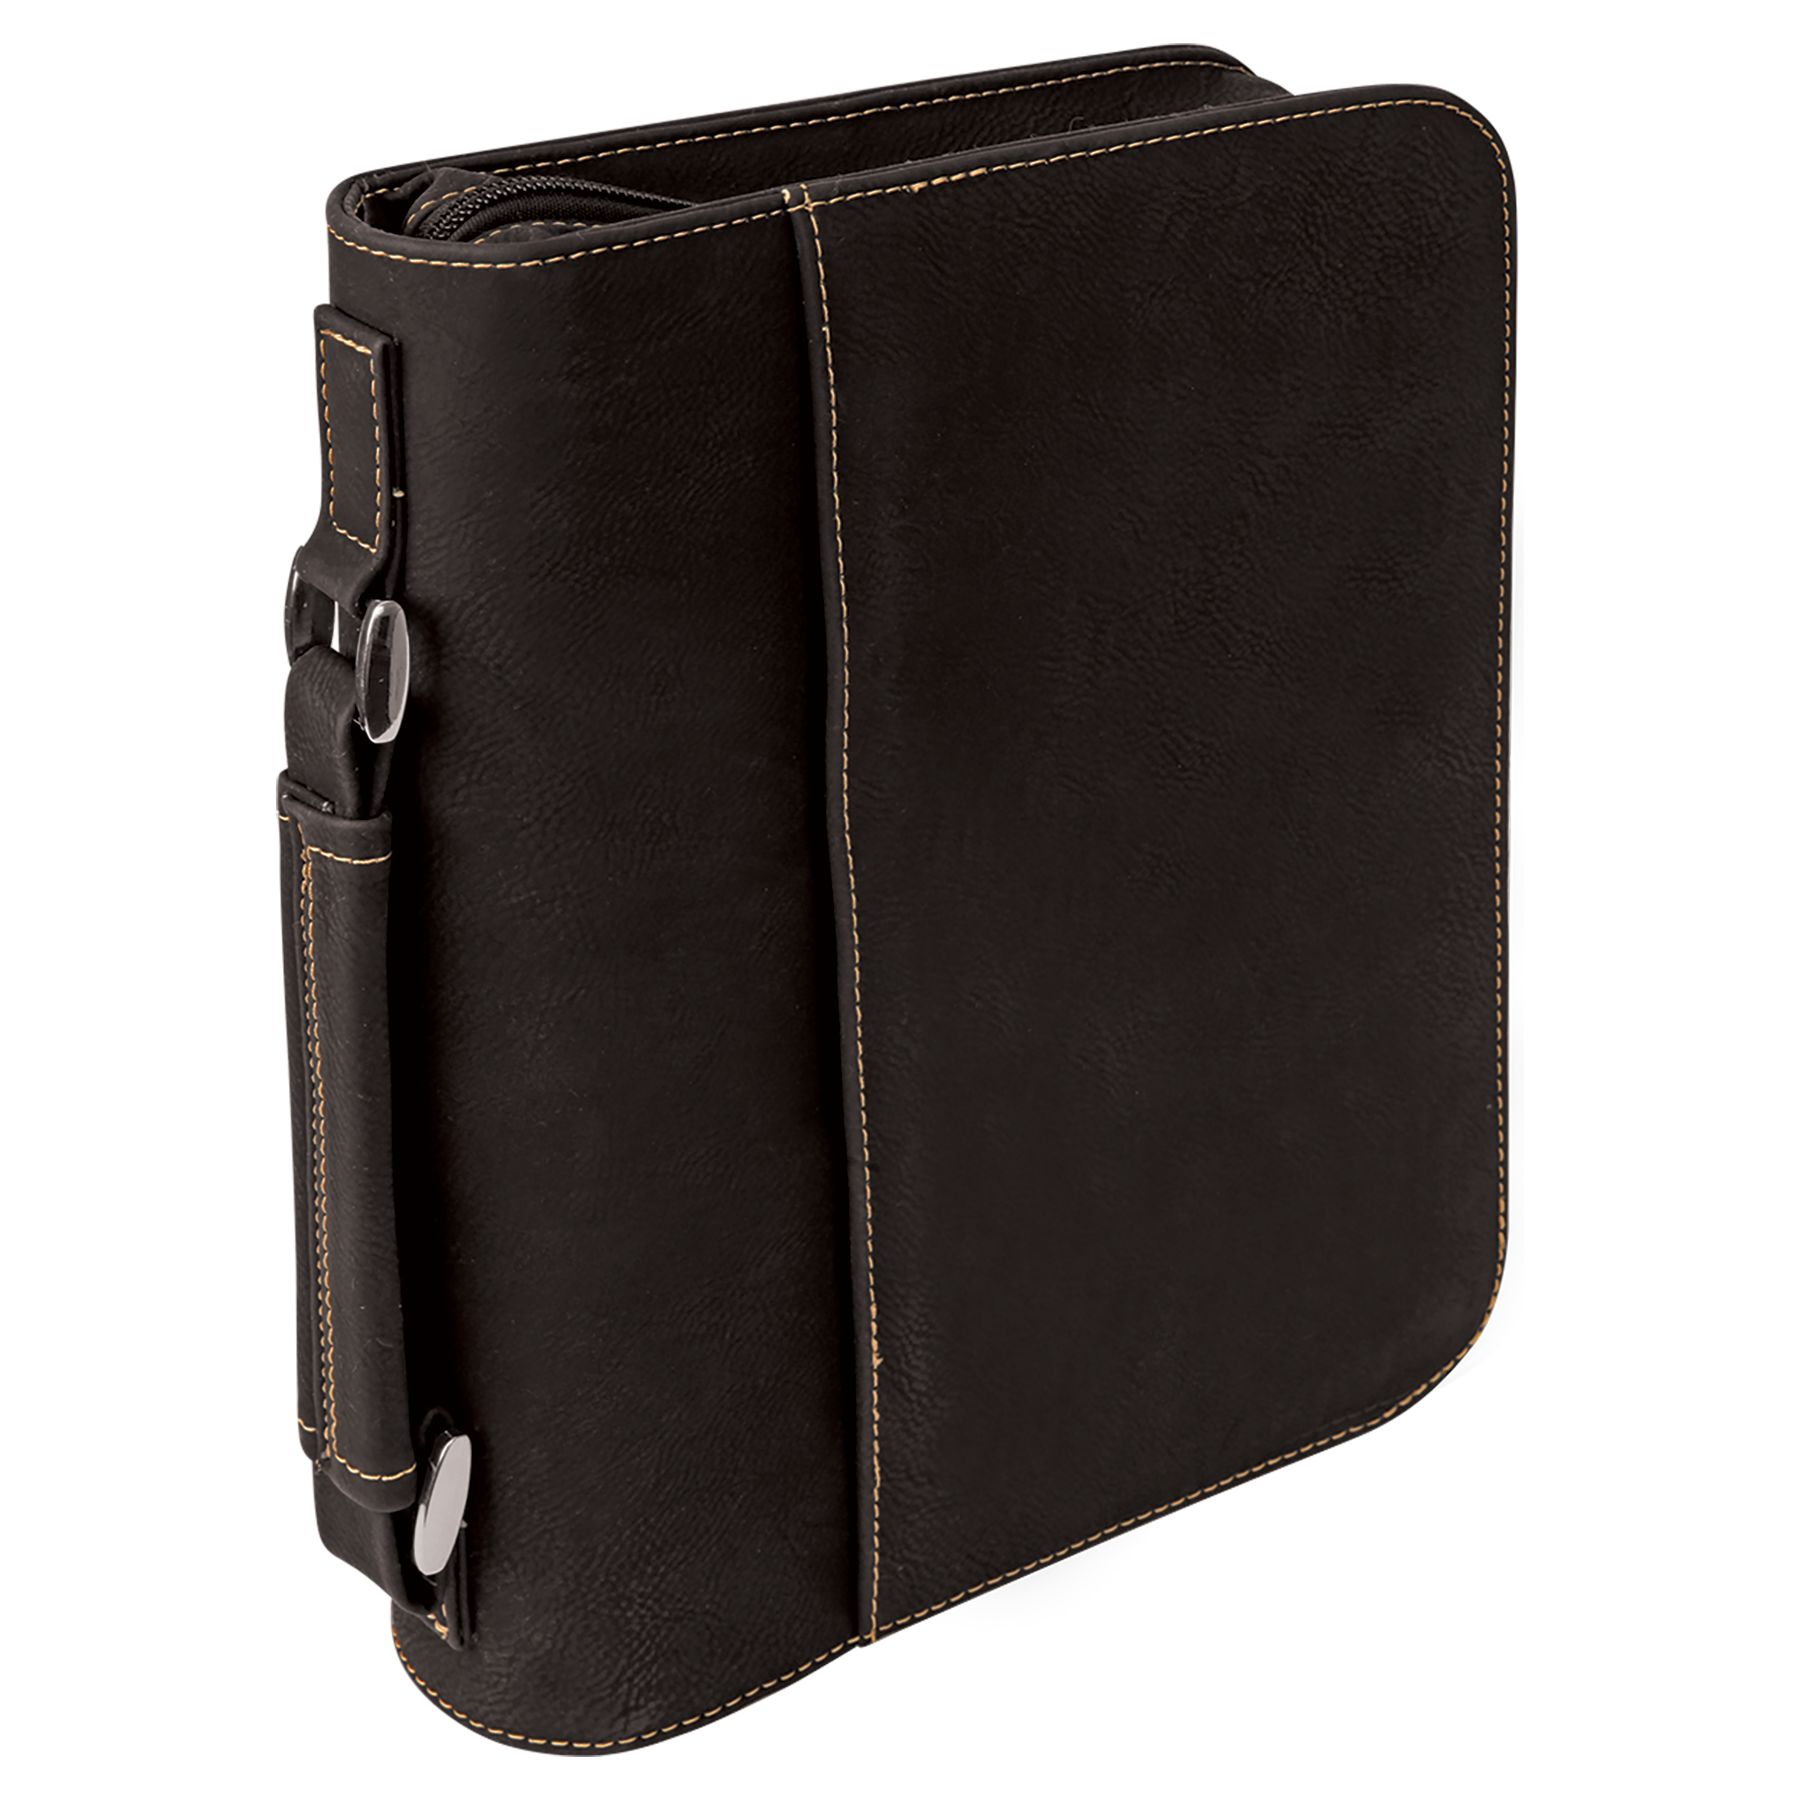 7 1/2" x 10 3/4" Leatherette Book/Bible Cover with Handle & Zipper